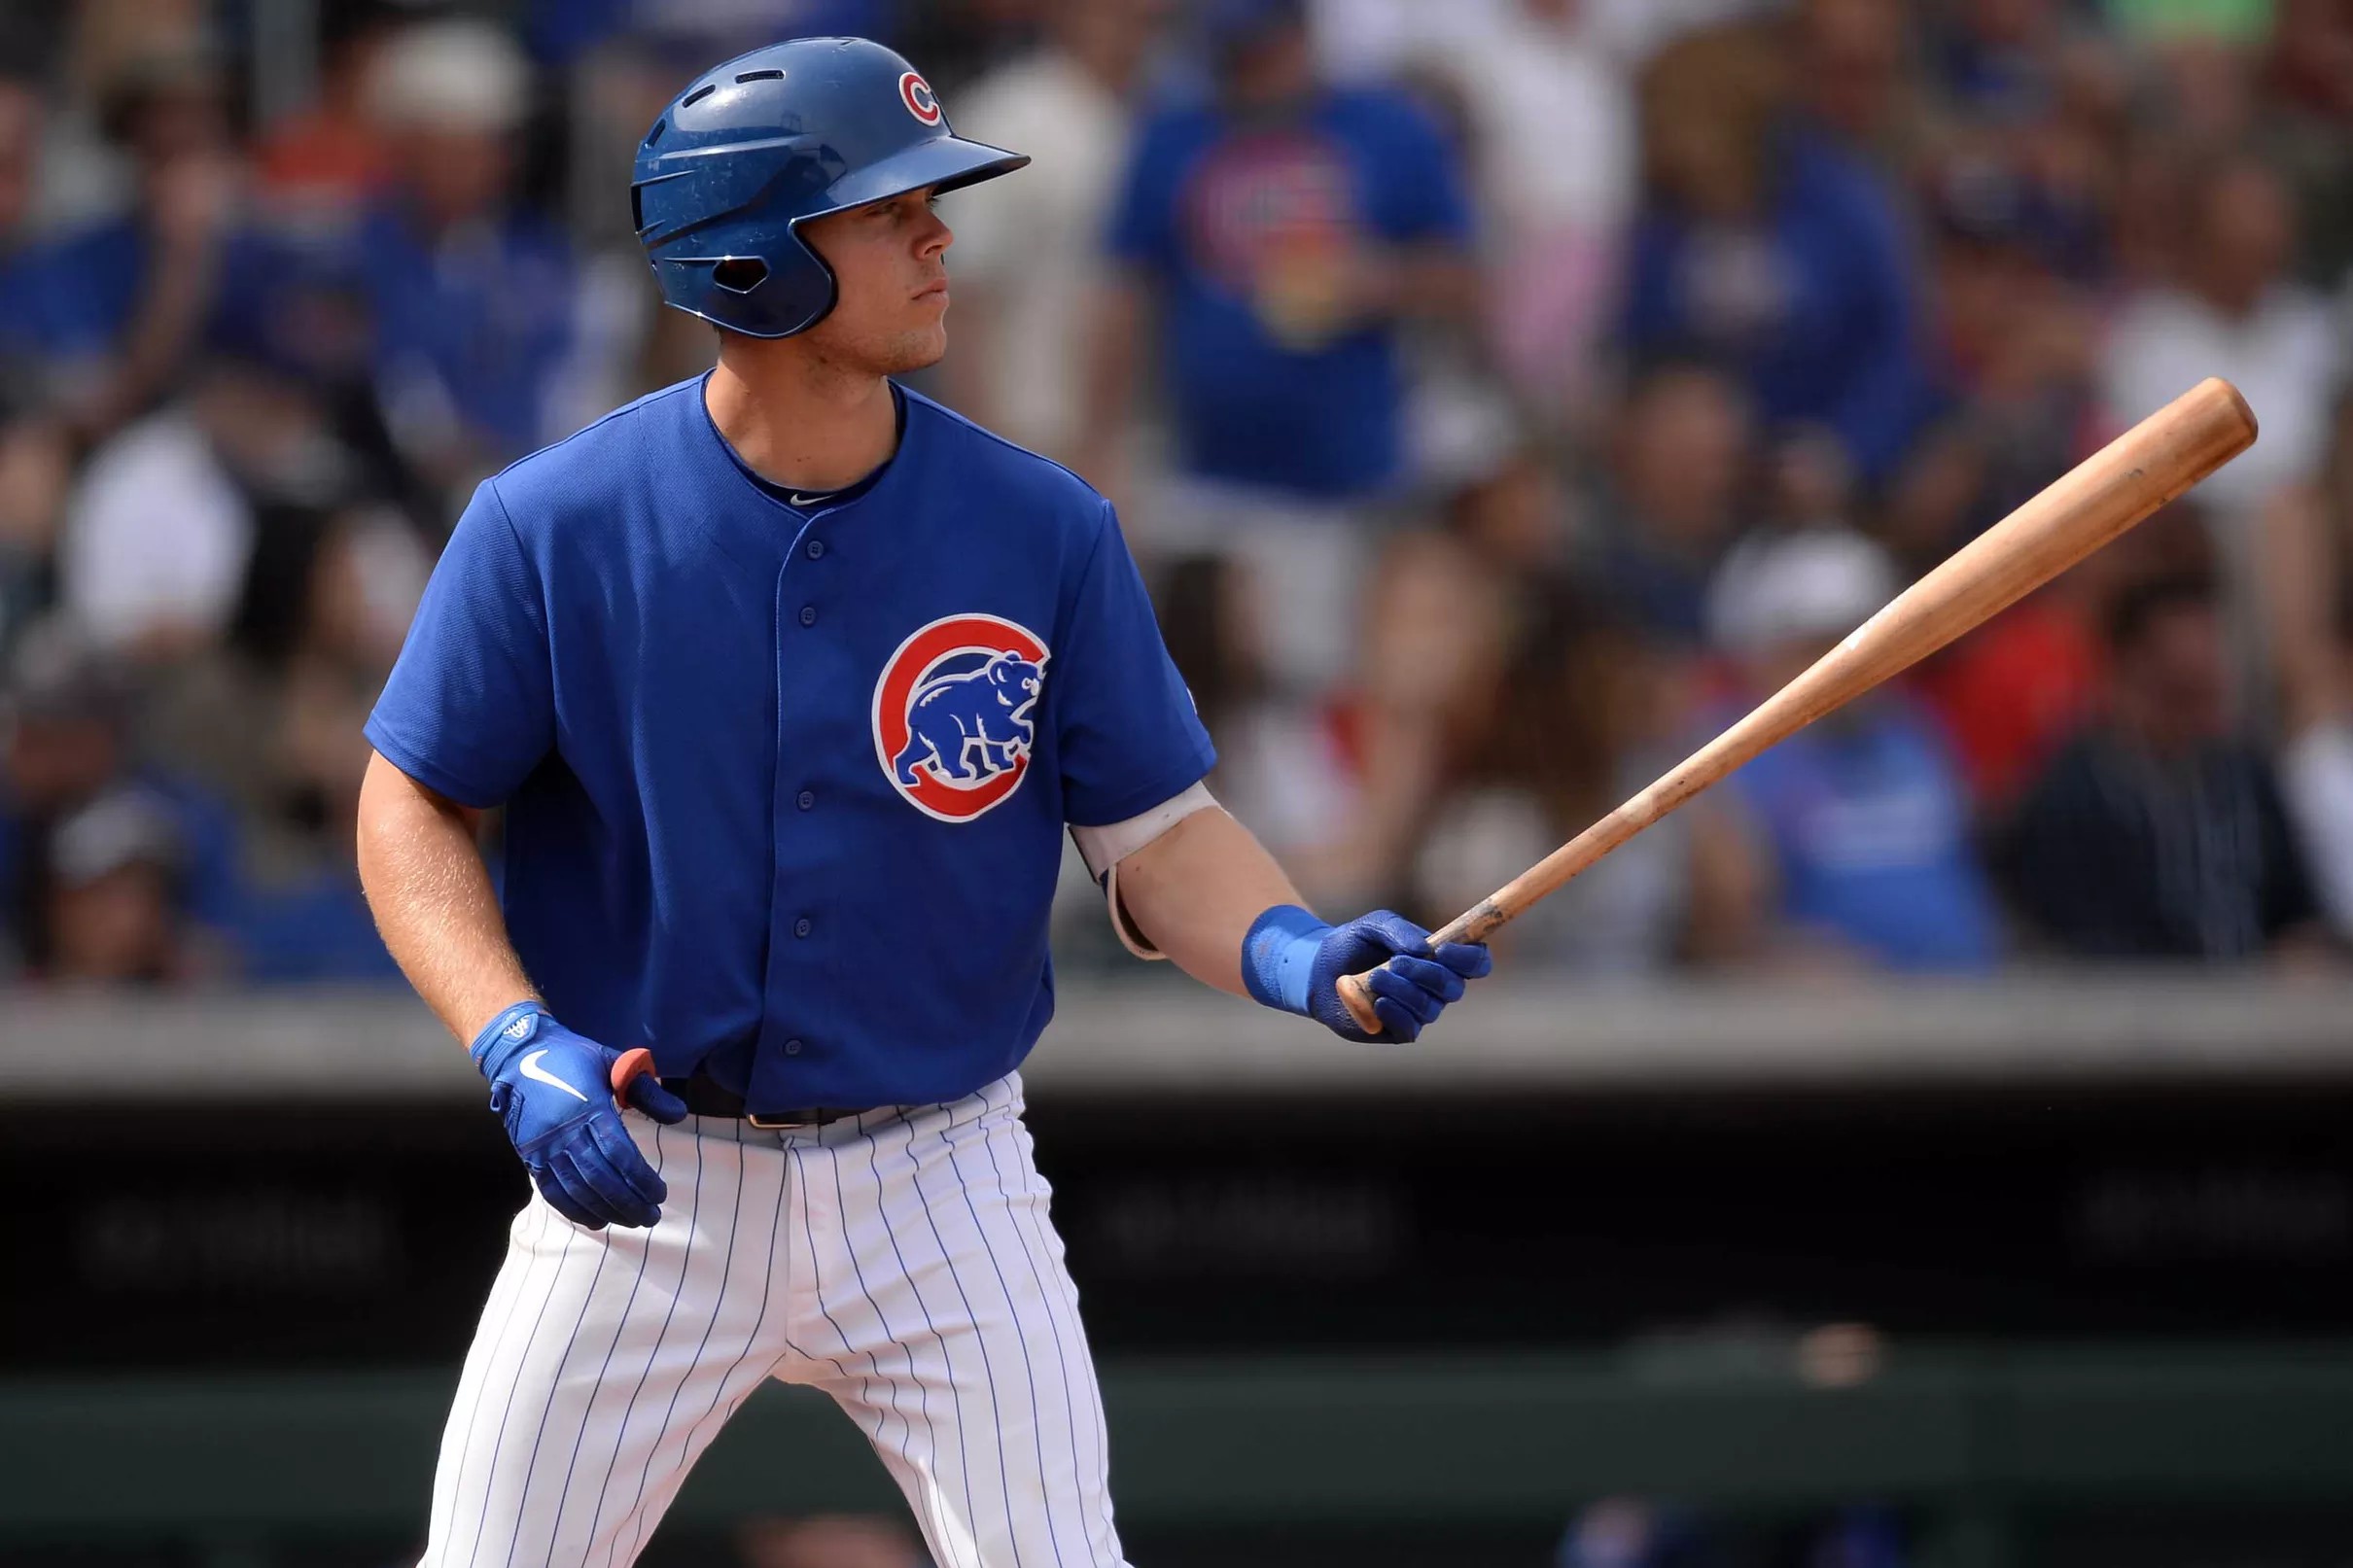 Cubs prospect Nico Hoerner will play for DoubleA Tennessee